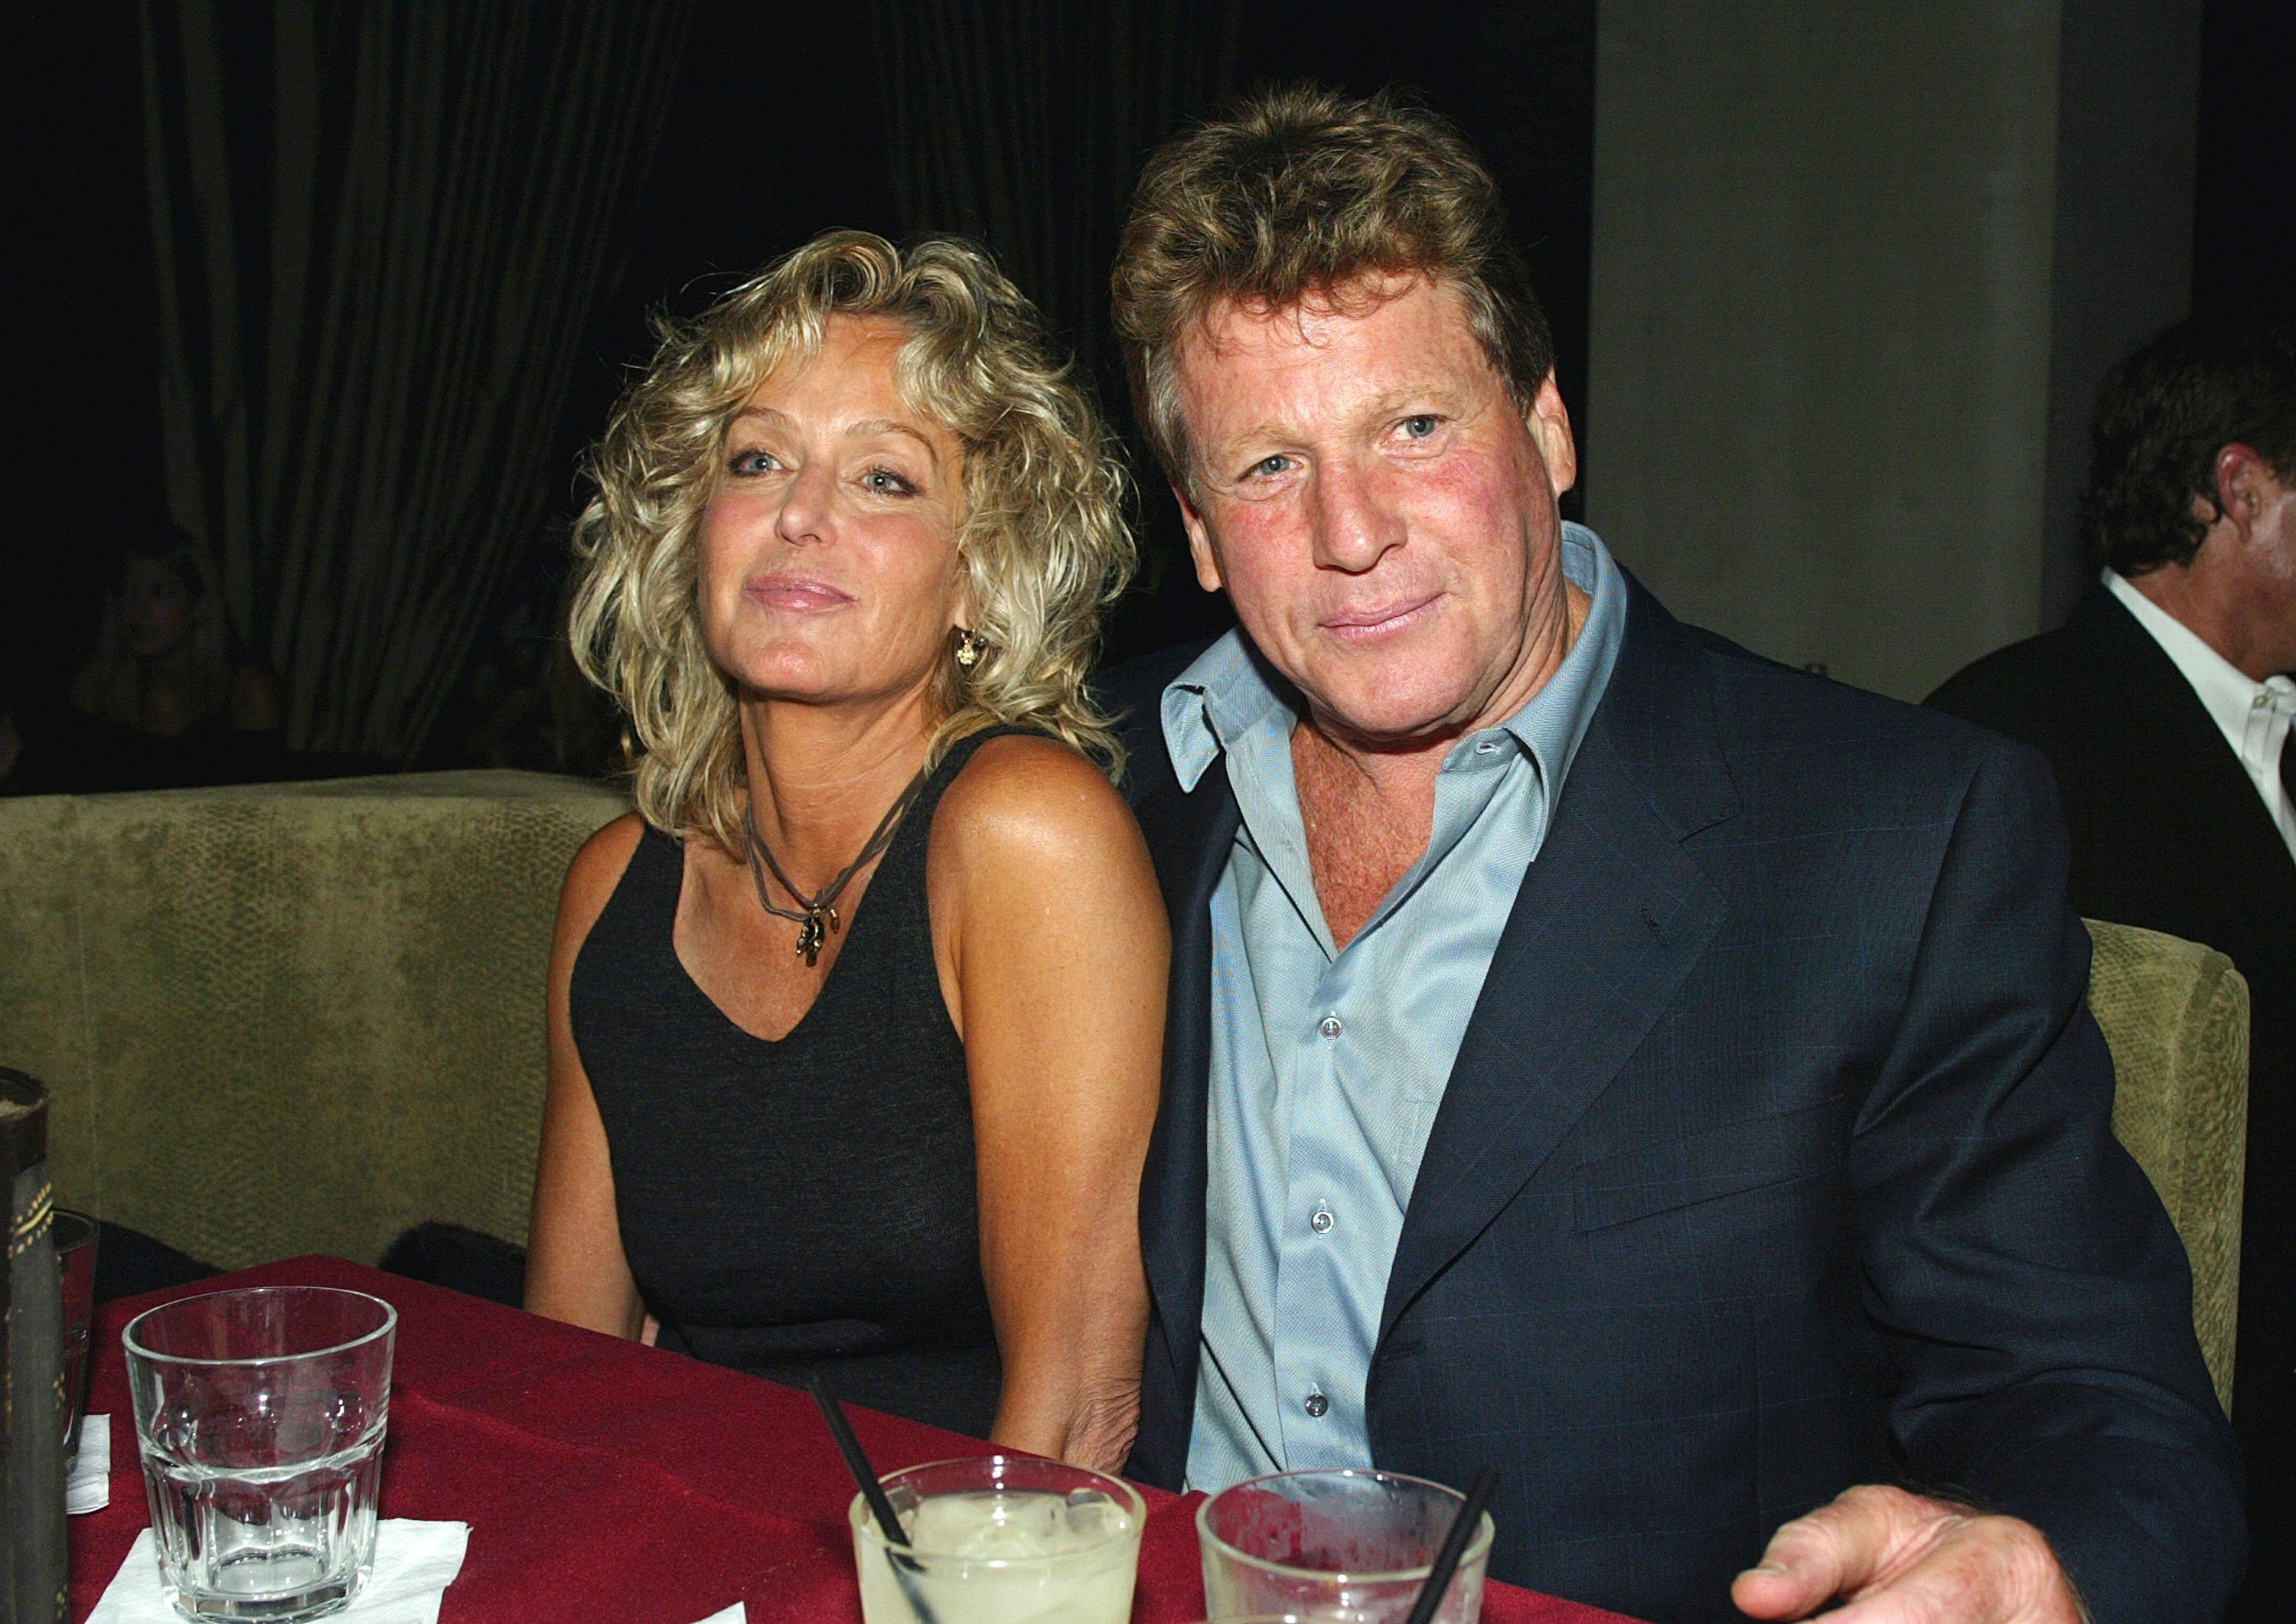 Ryan O'Neal and Farrah Fawcett. | Source: Getty Images